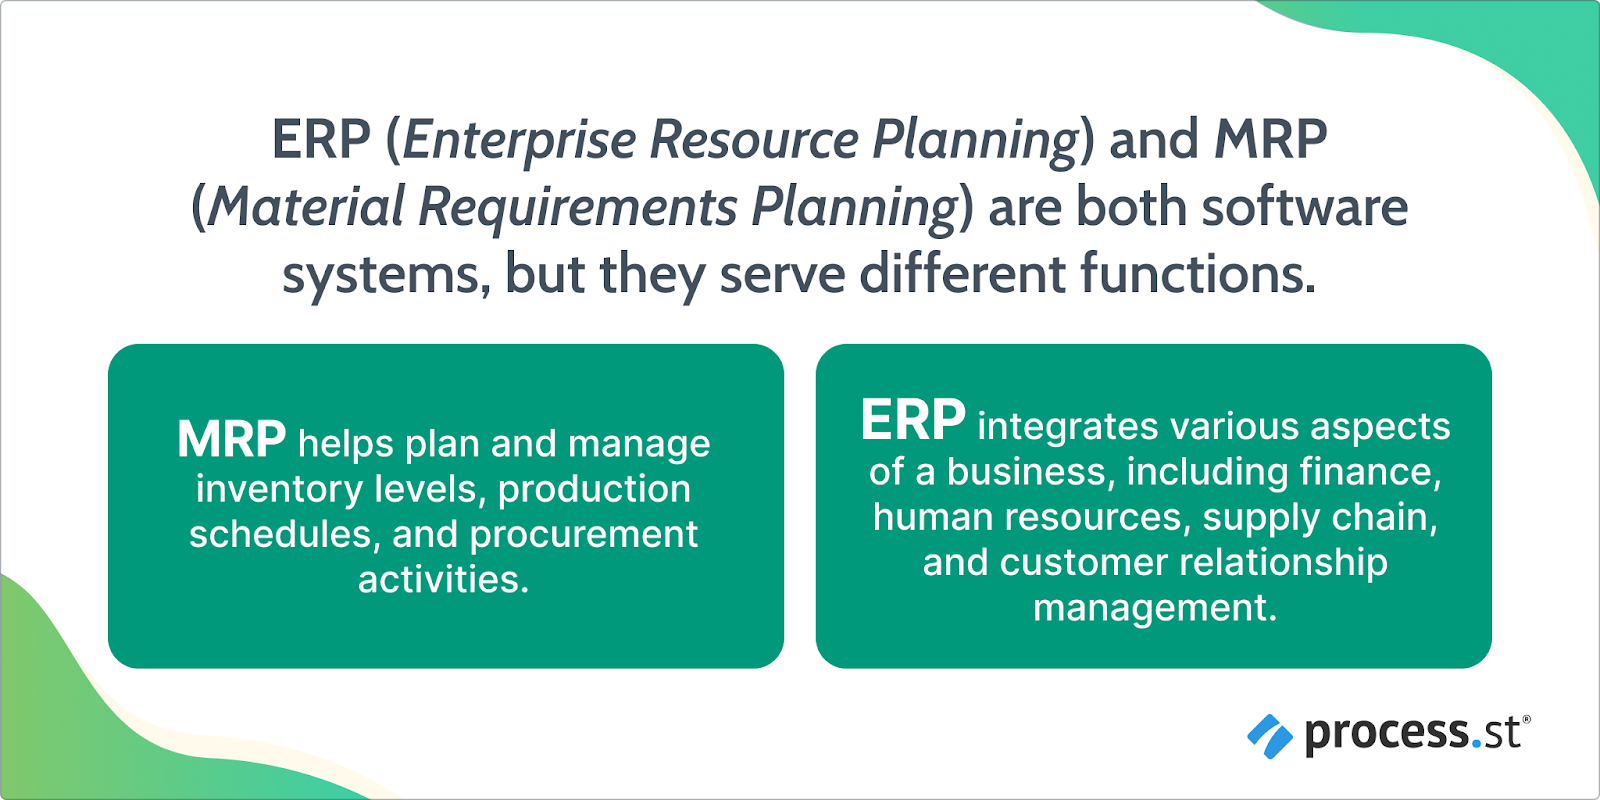 image showing the differences between enterprise resource planning and material requirements planning 